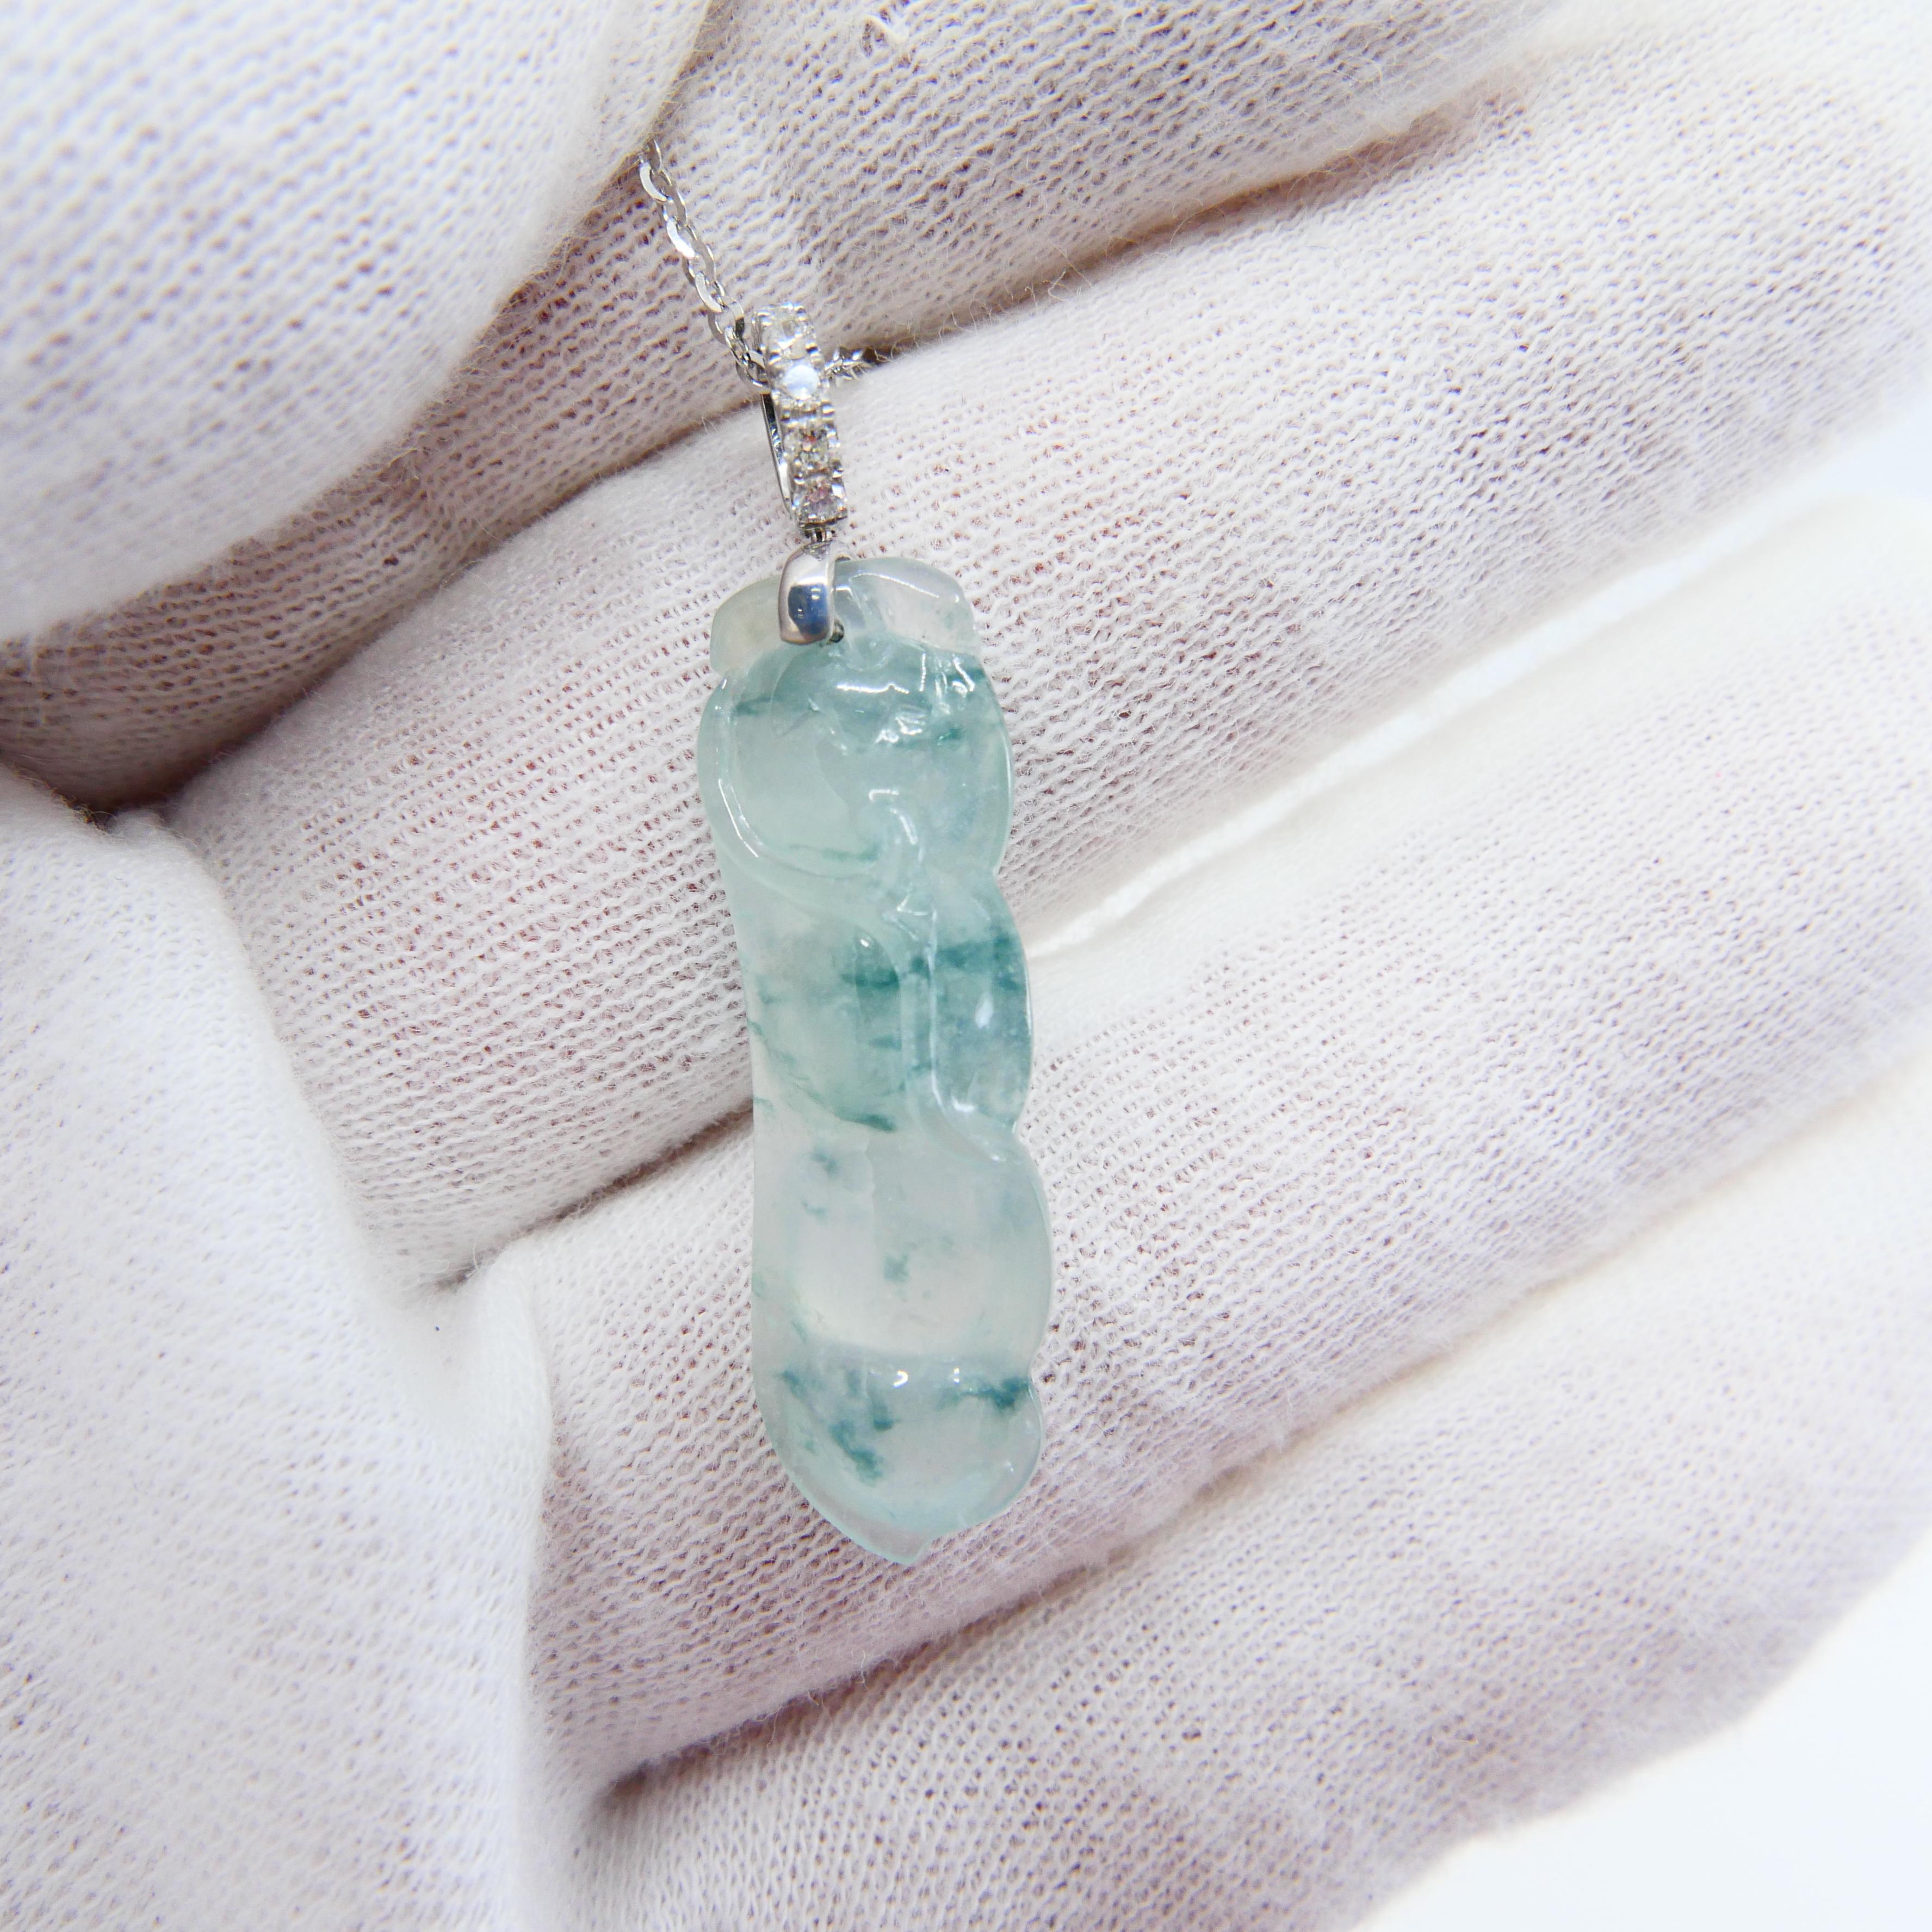 Rough Cut Certified Type A Icy Peapod Jade and Diamond Drop Necklace Pendant, Green Veins